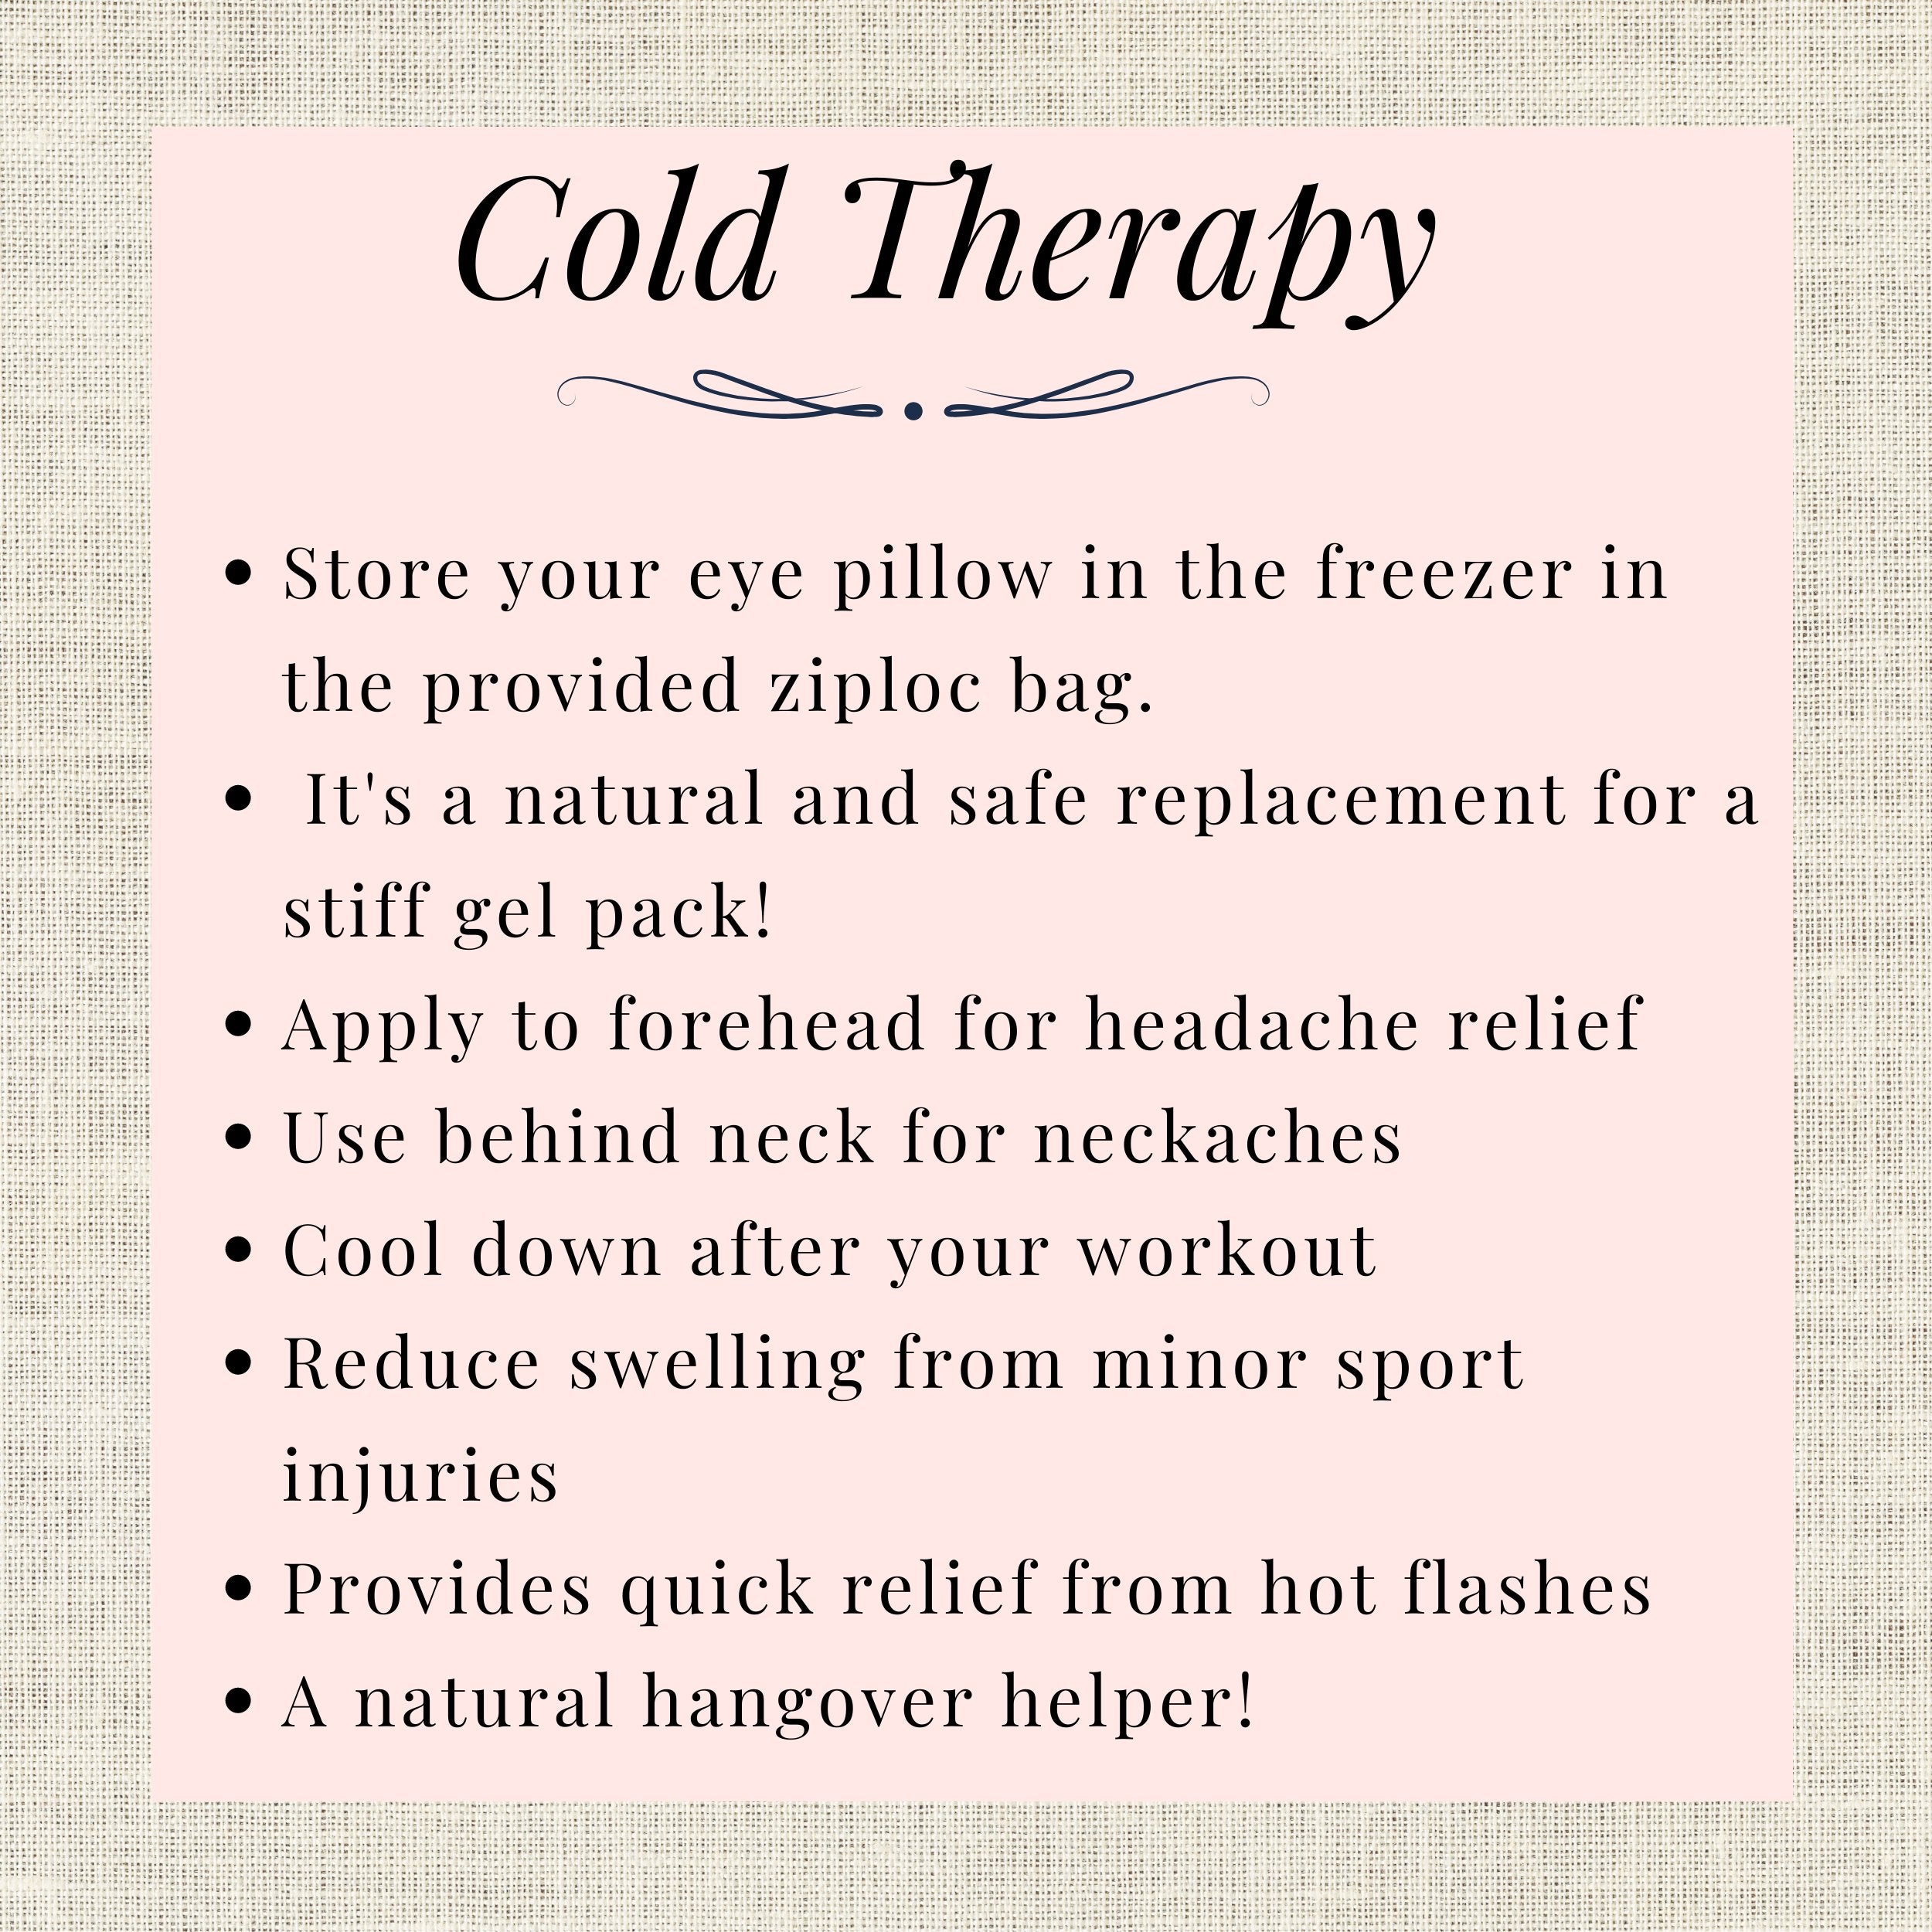 Detailed instructions for using Cold Therapy